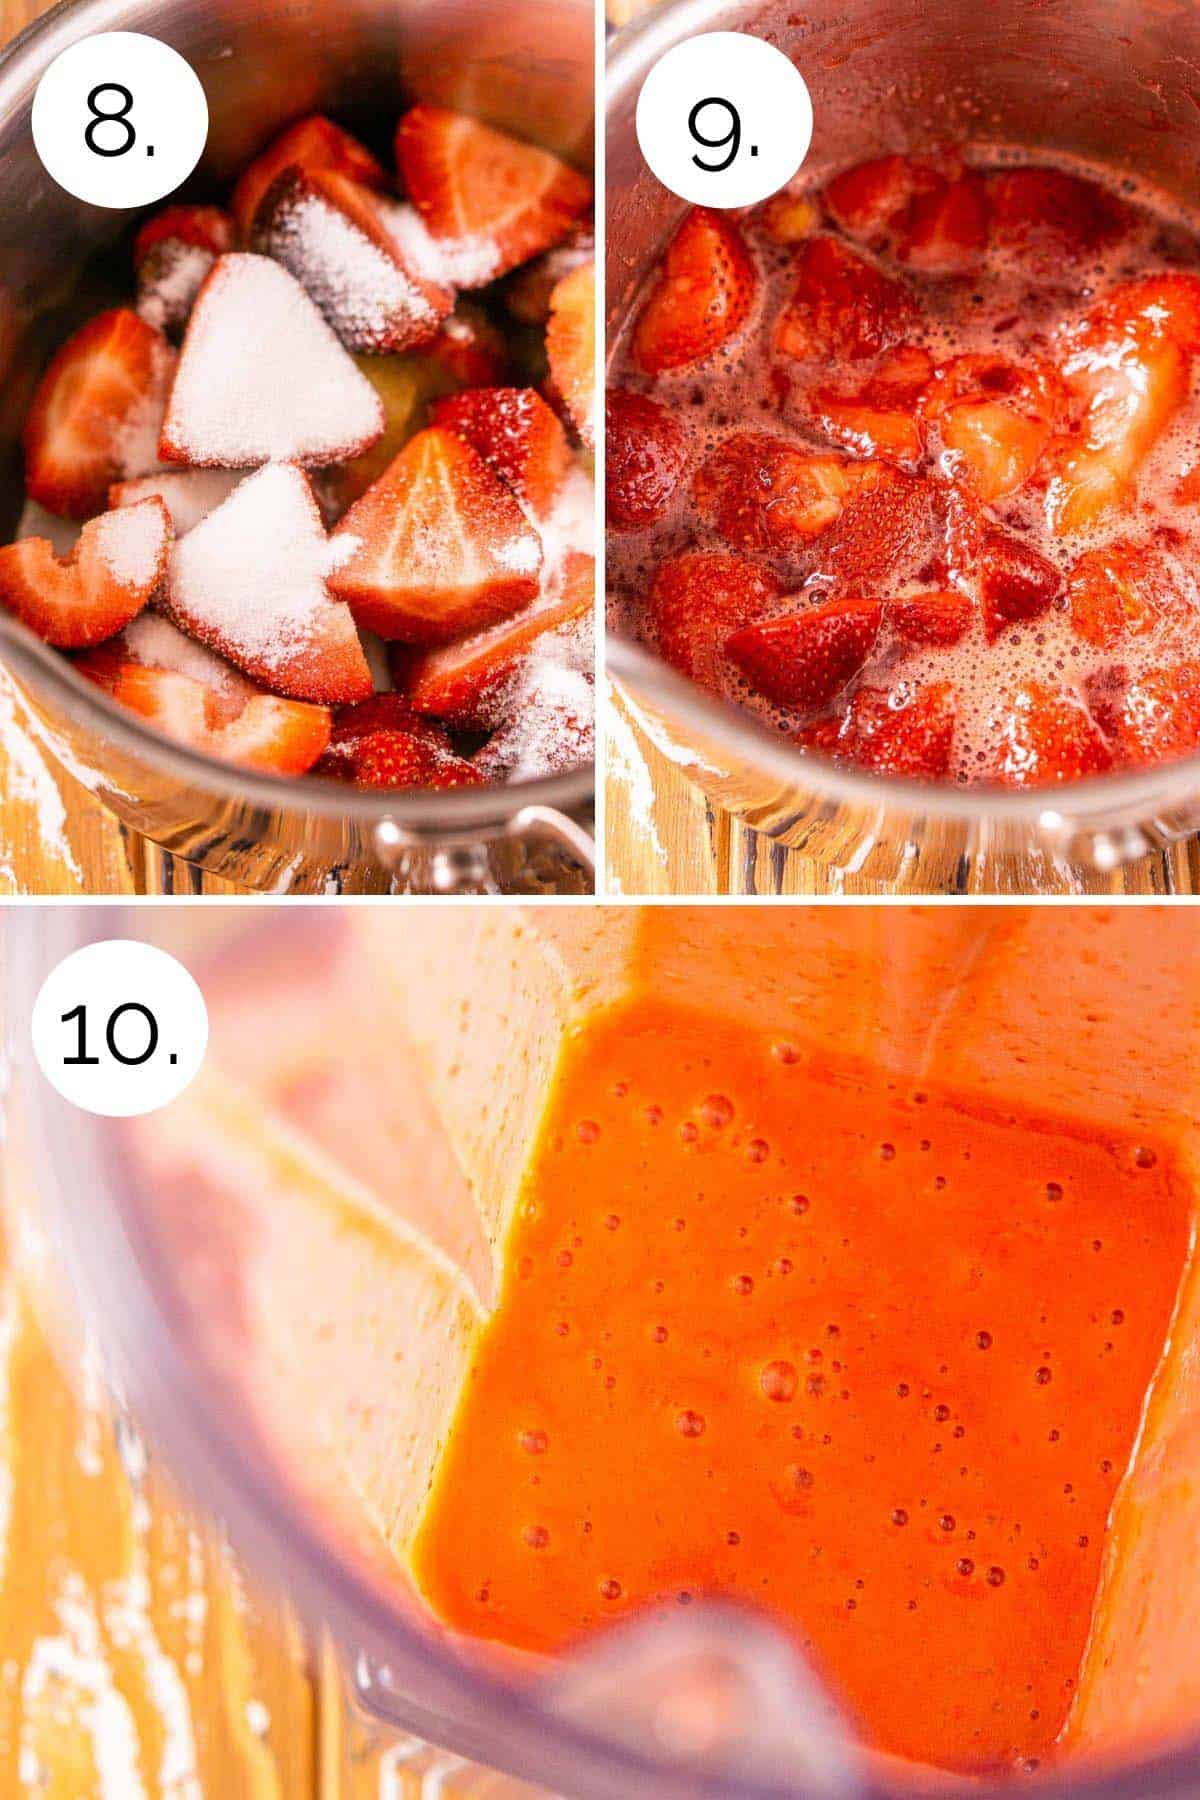 Show how to cook the strawberries and then blending into a smooth mixture.